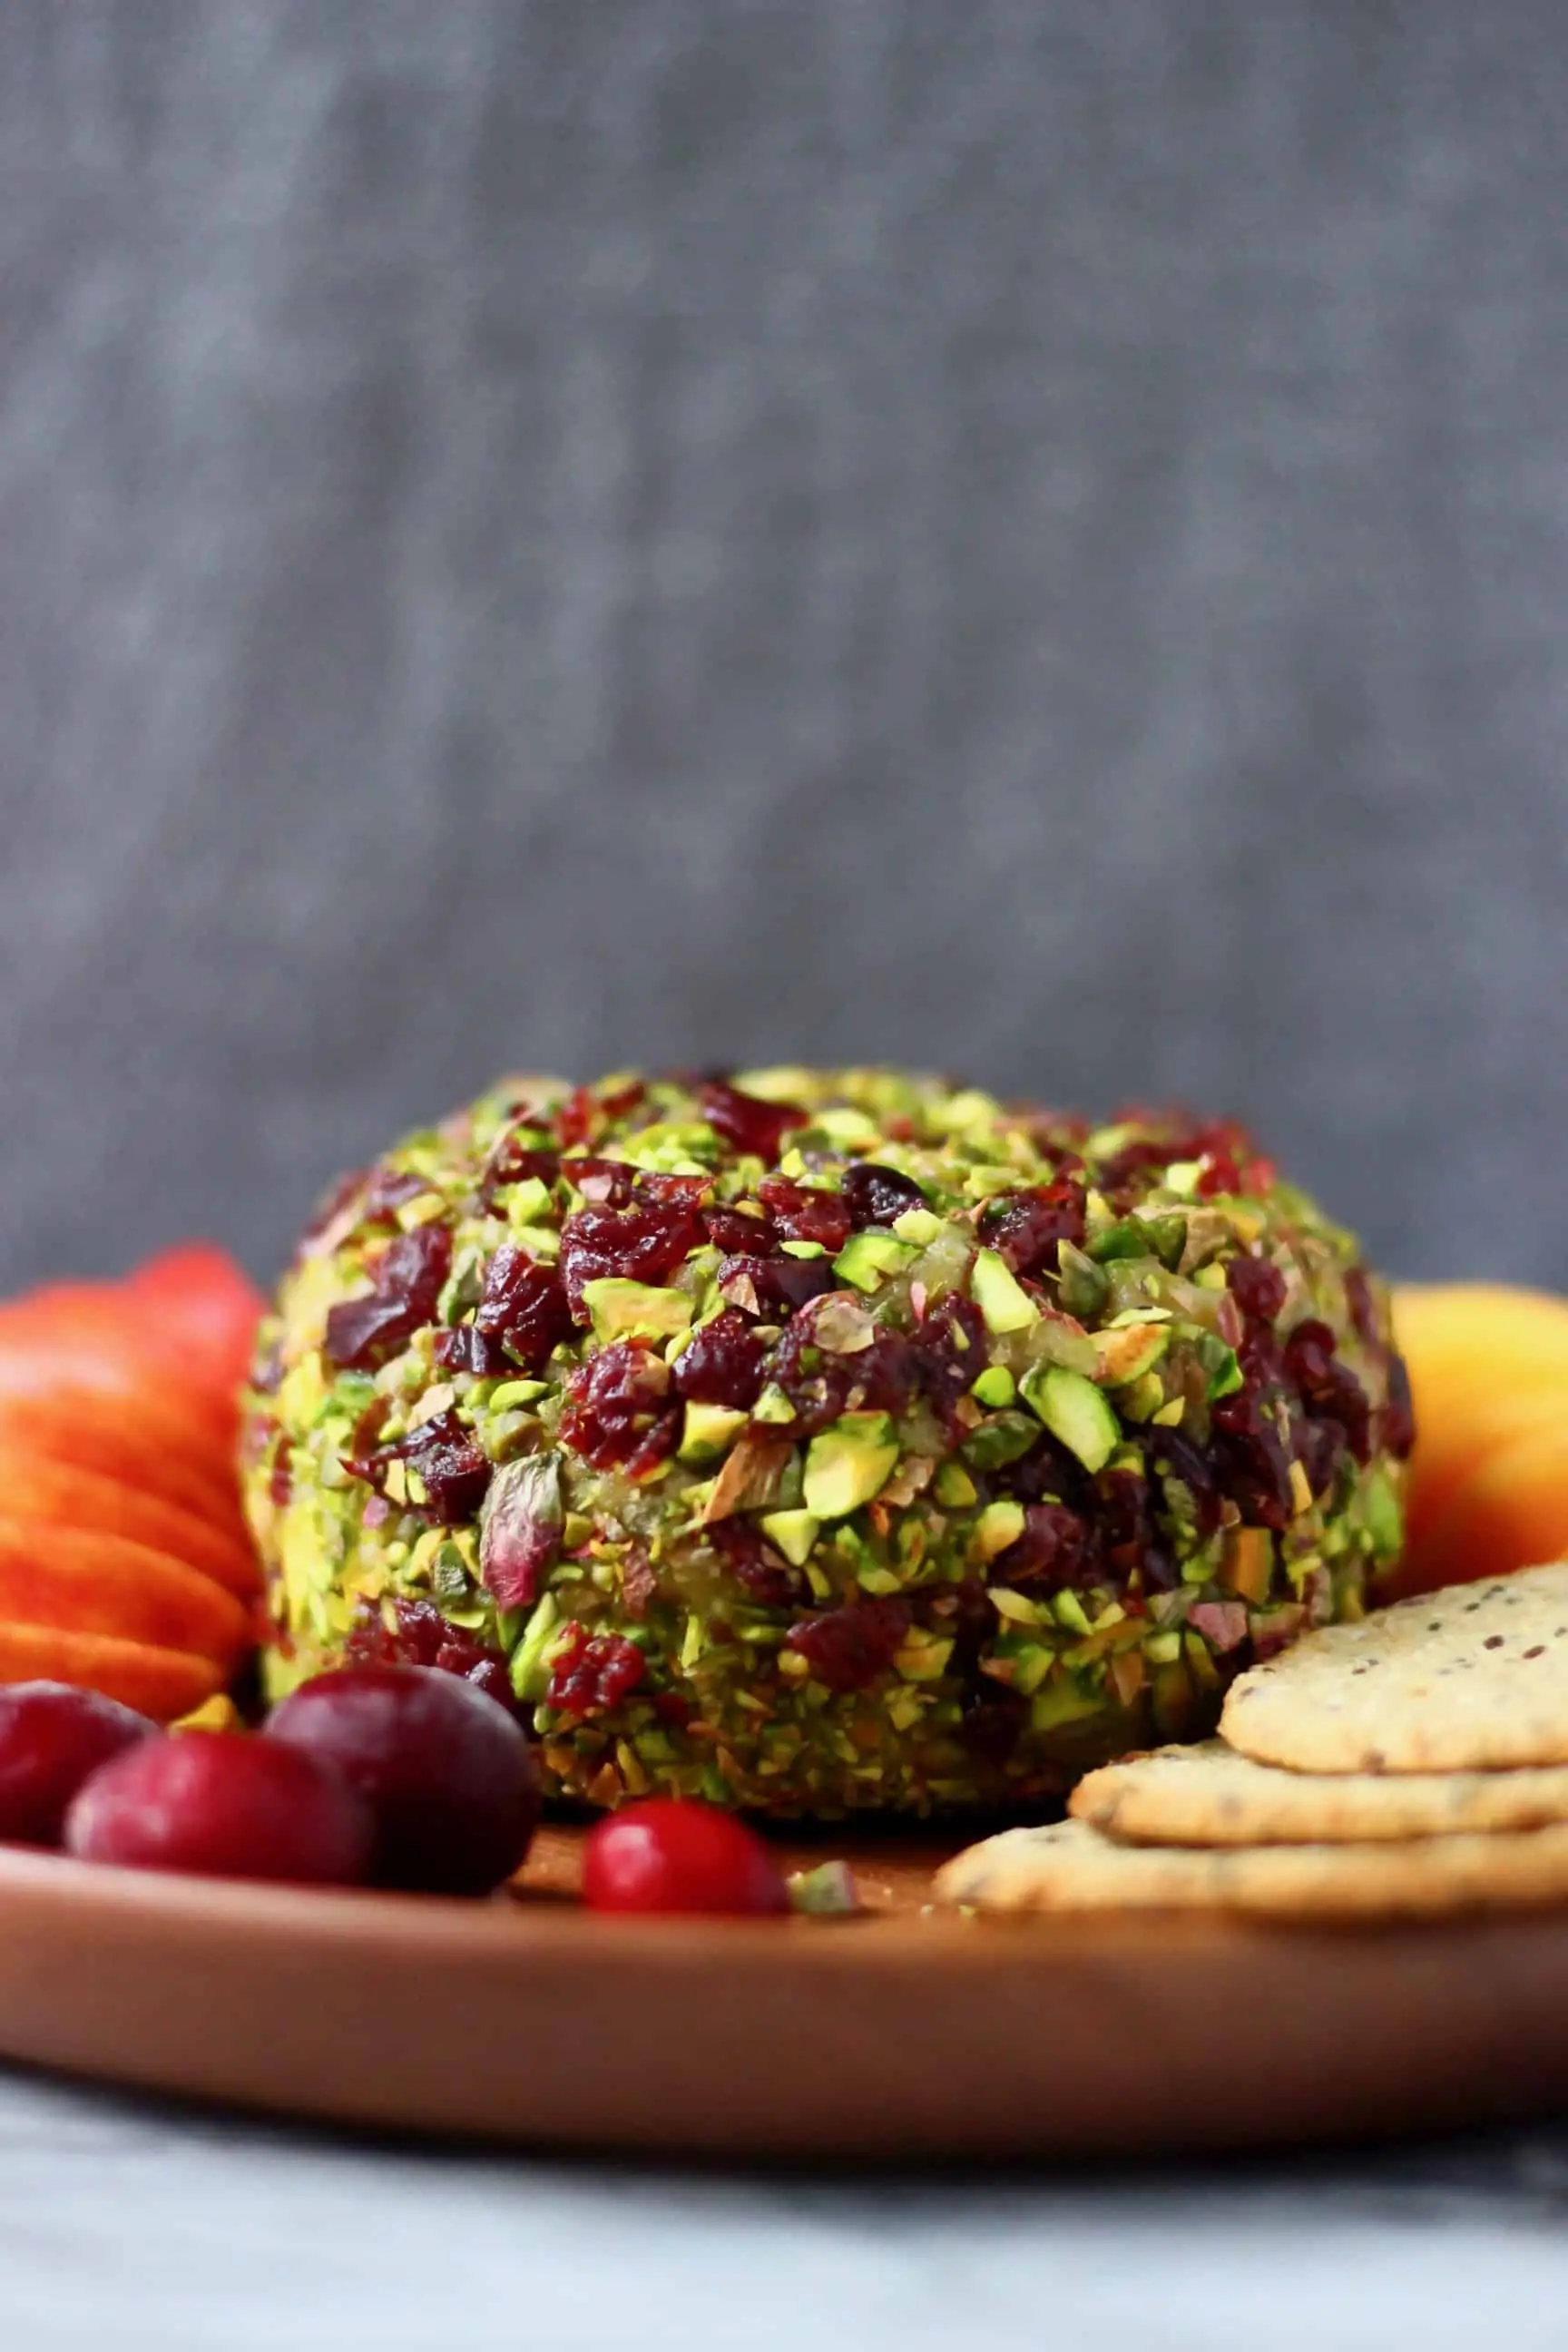 A ball of vegan cashew cheese covered with chopped pistachios and dried cranberries on a wooden plate with sliced apples and oatcakes